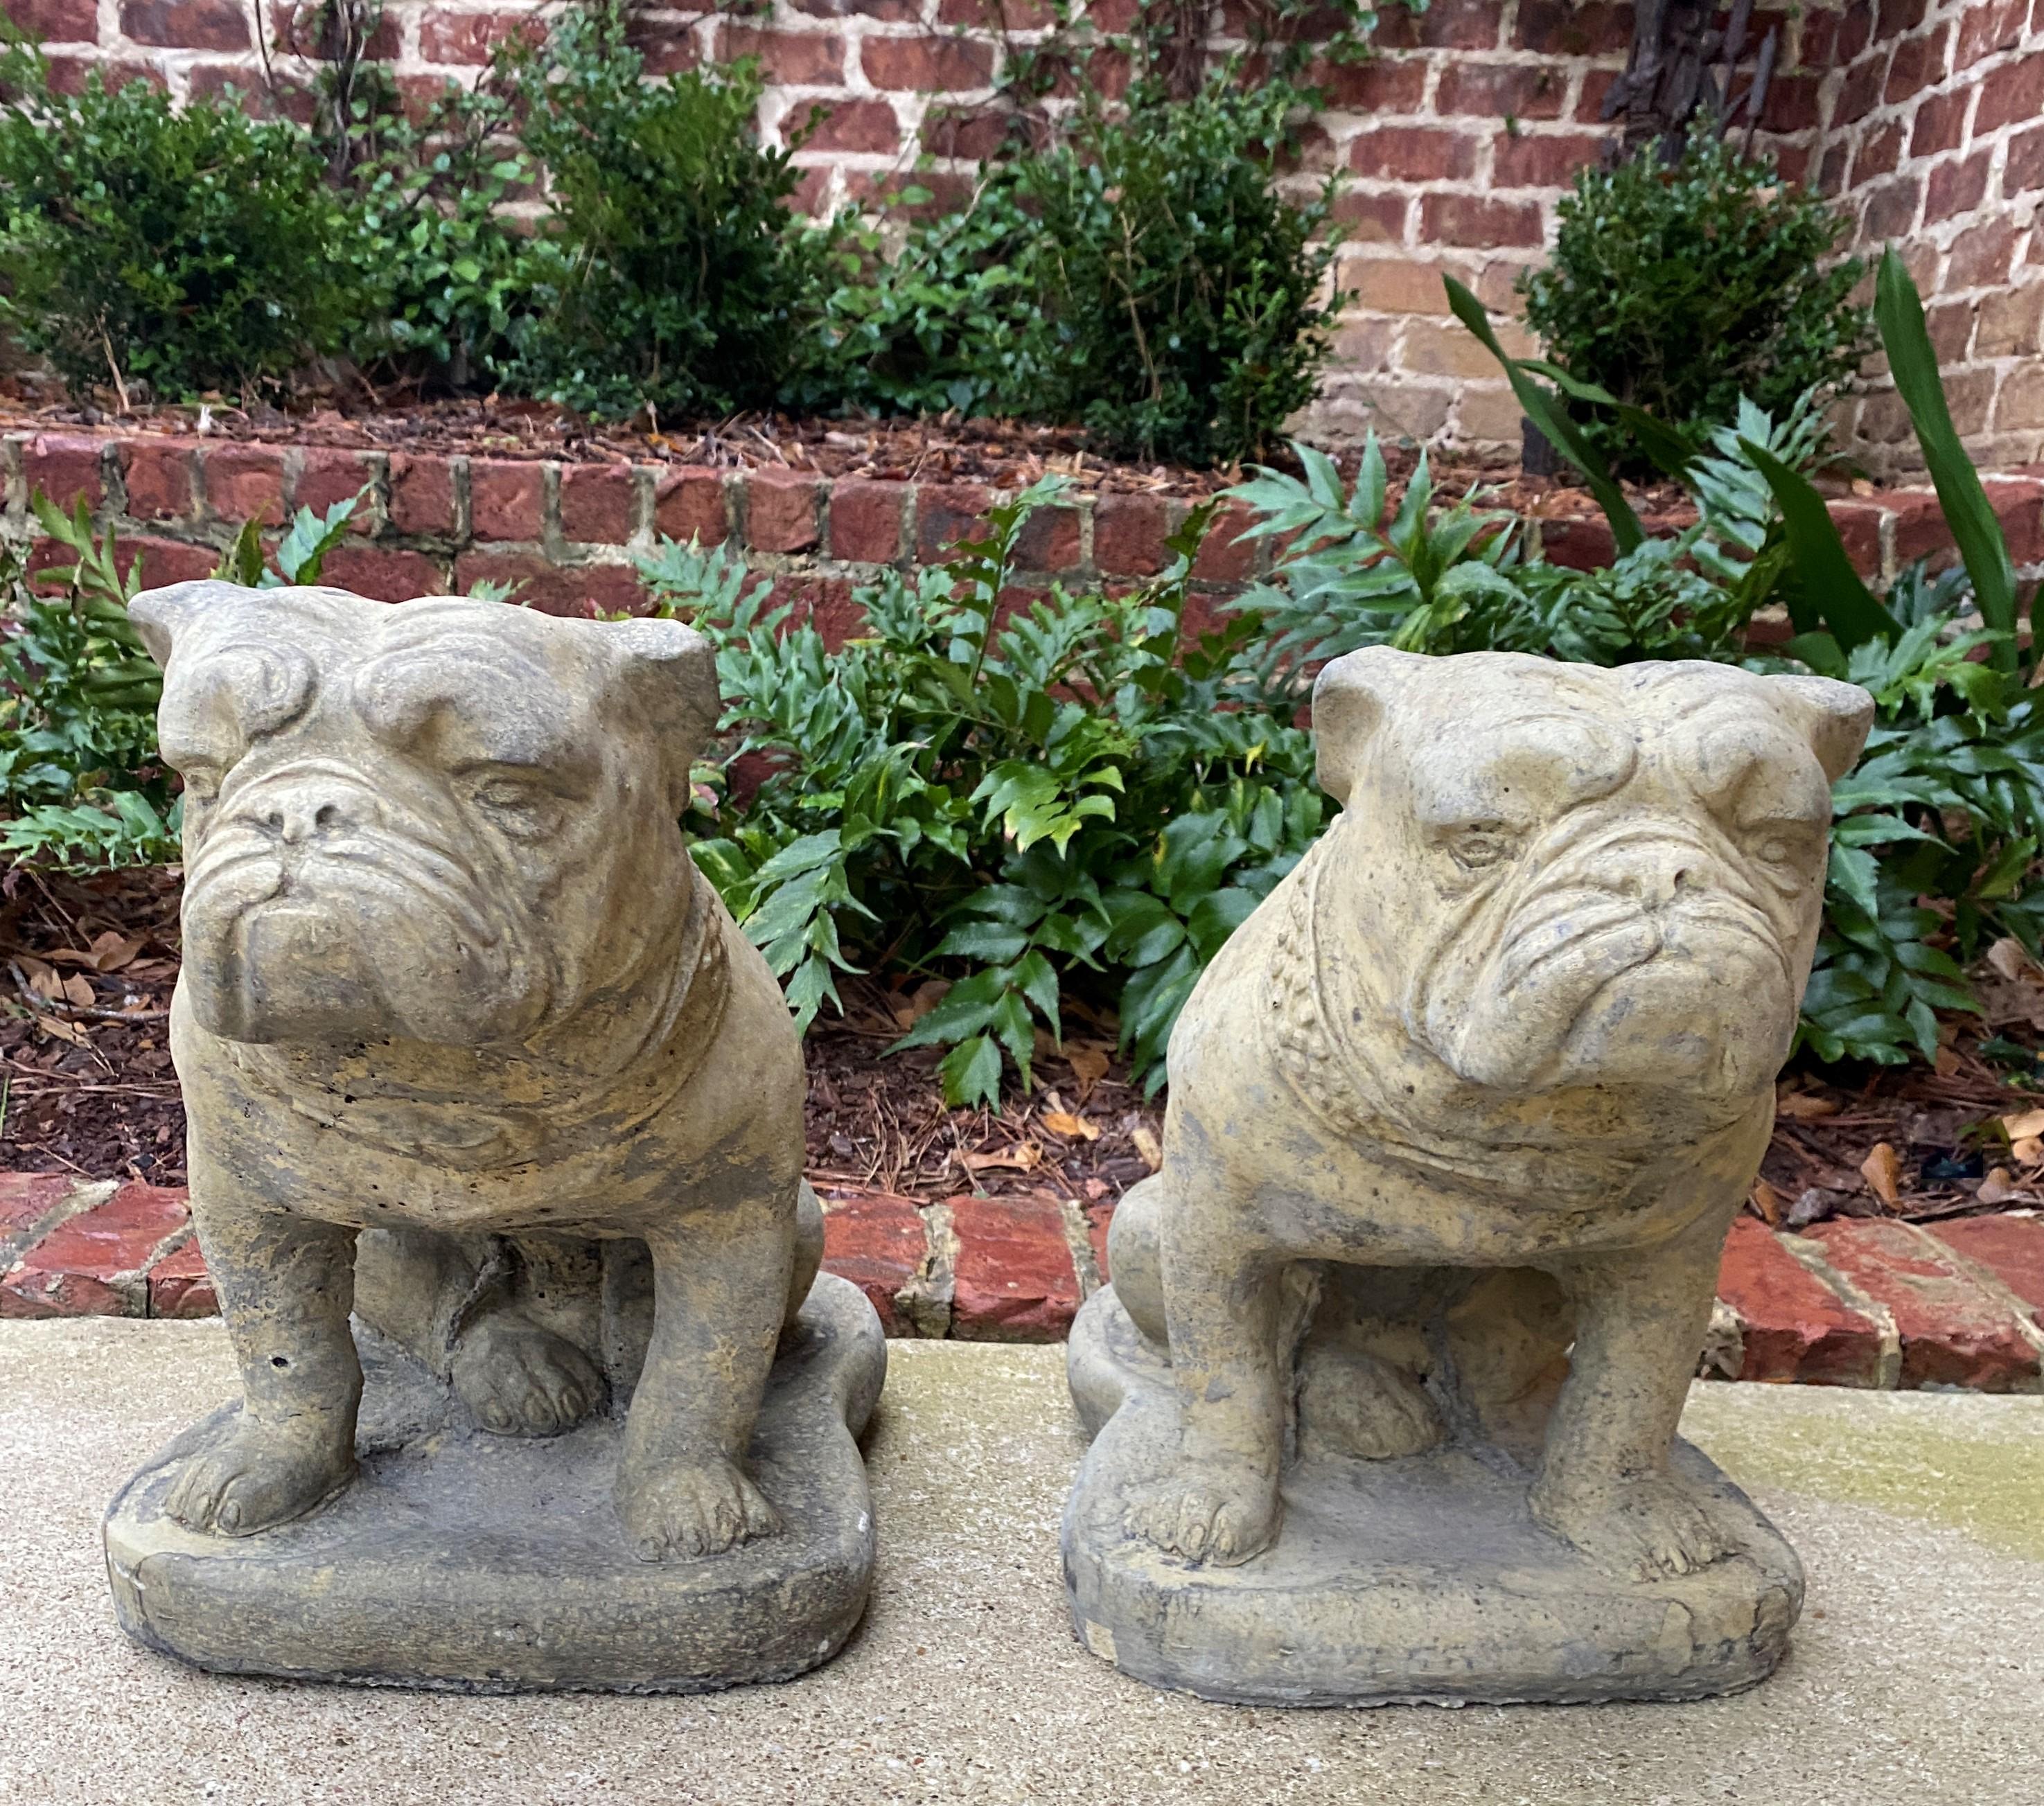 20th Century Vintage Statues Garden Figures Bulldogs Cast Stone Pair Seated Dogs